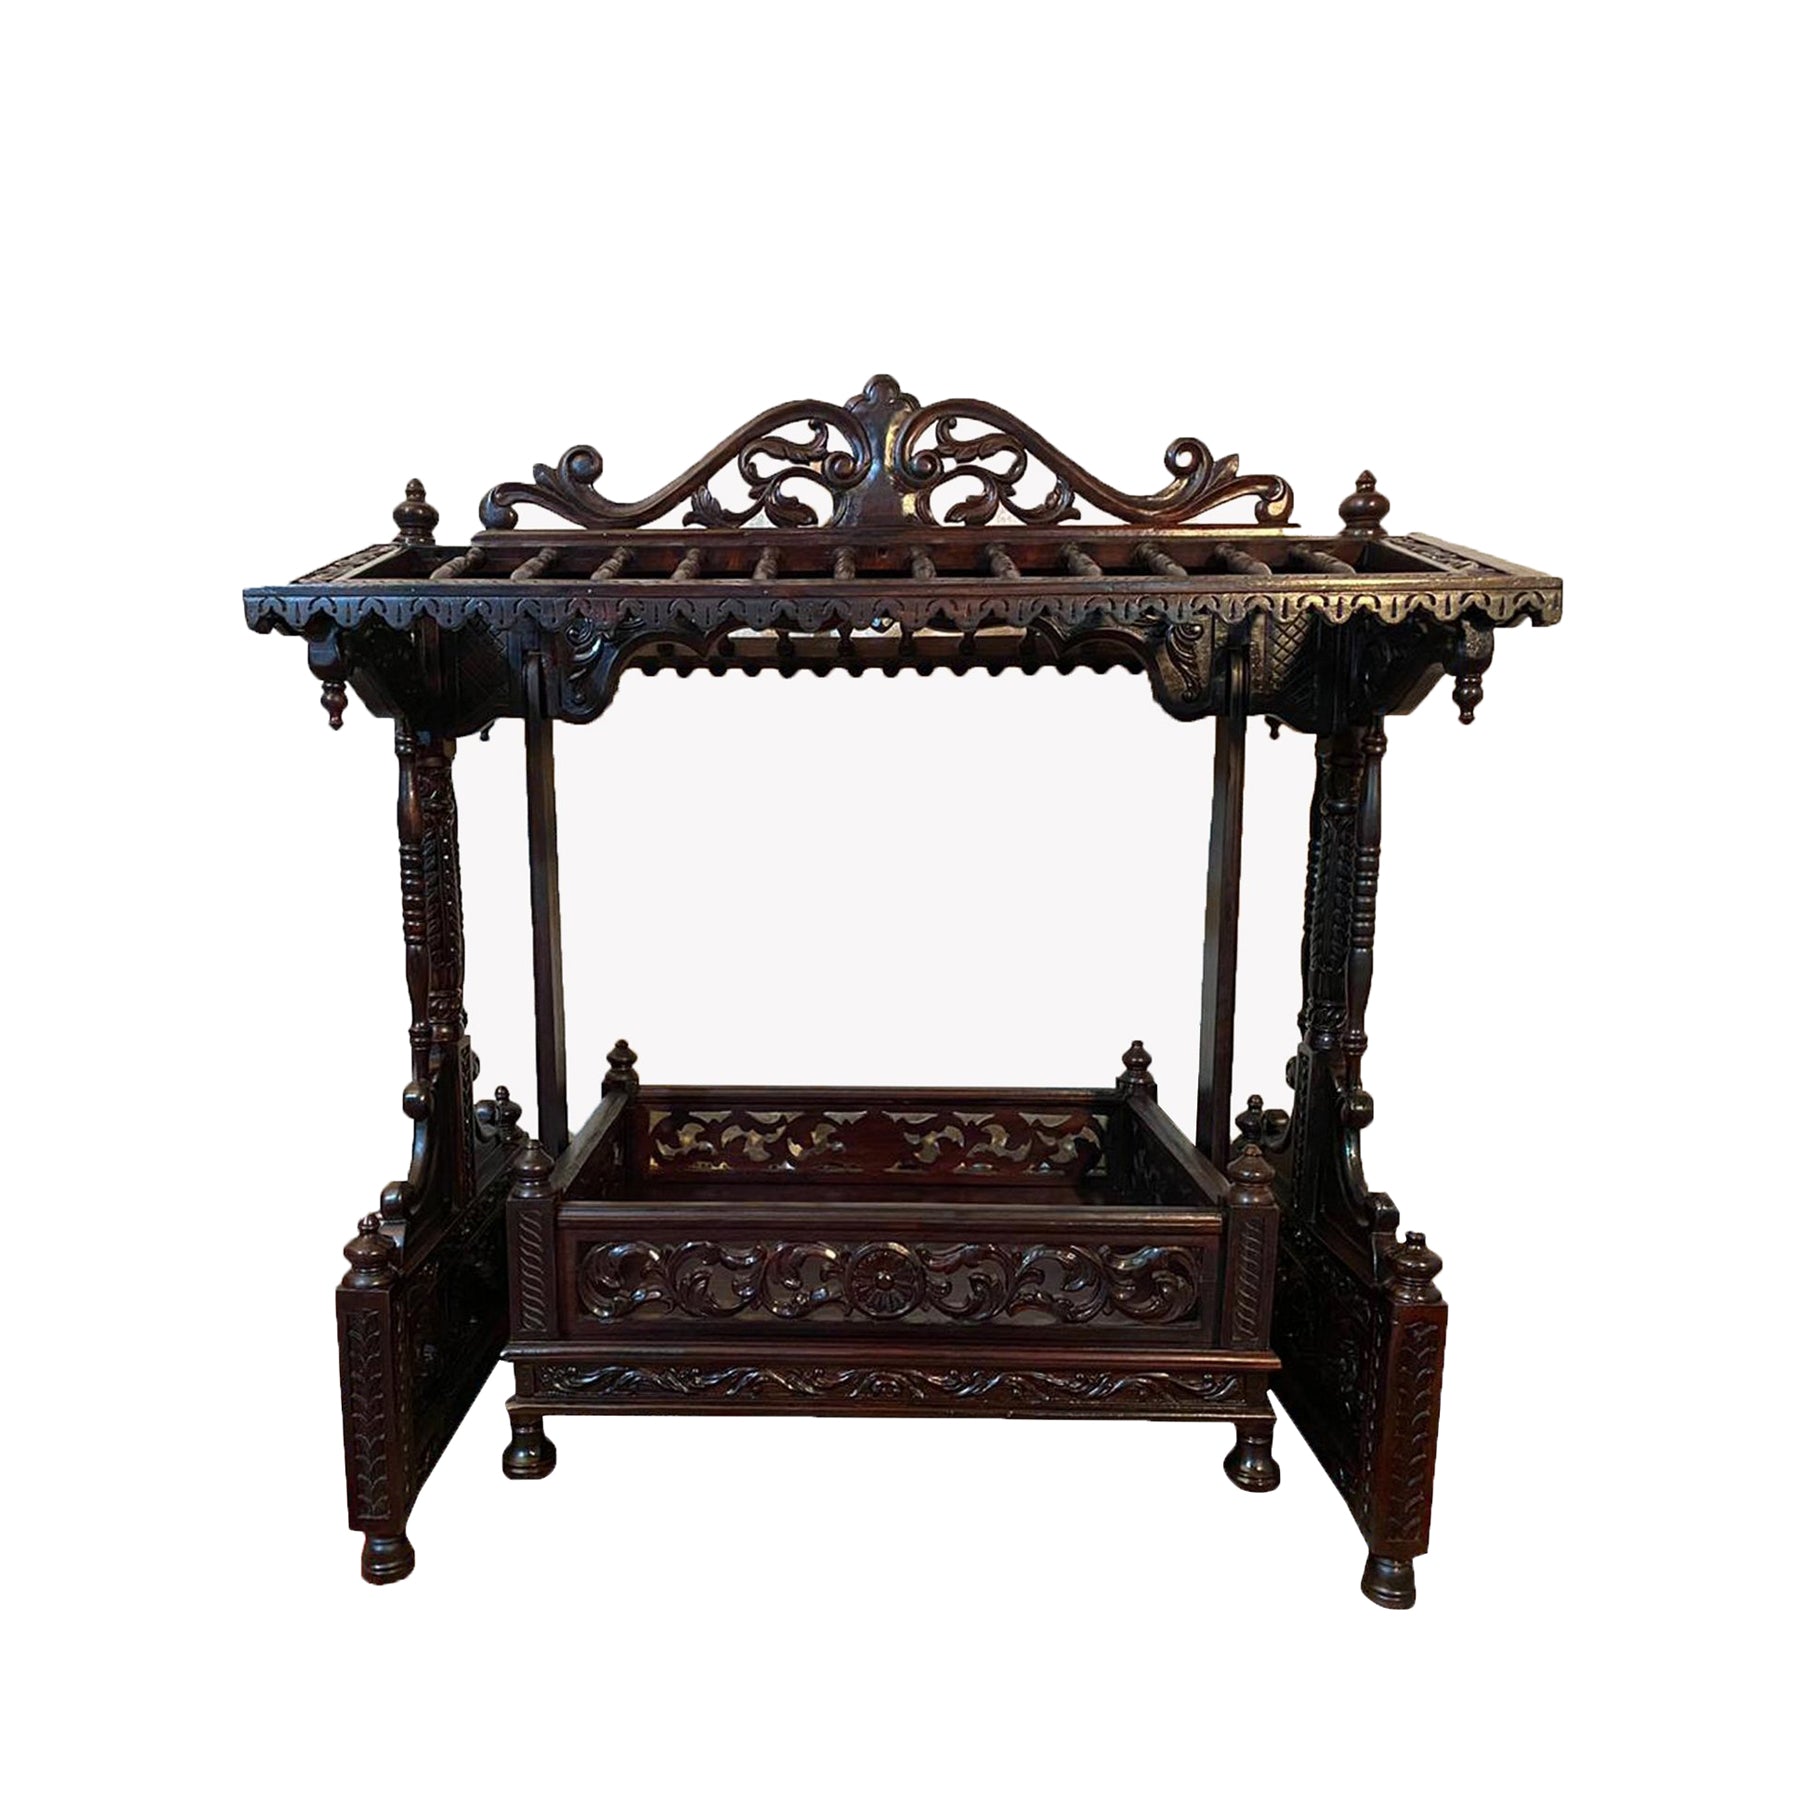 Intricate Carved Wooden Cradle Cradle